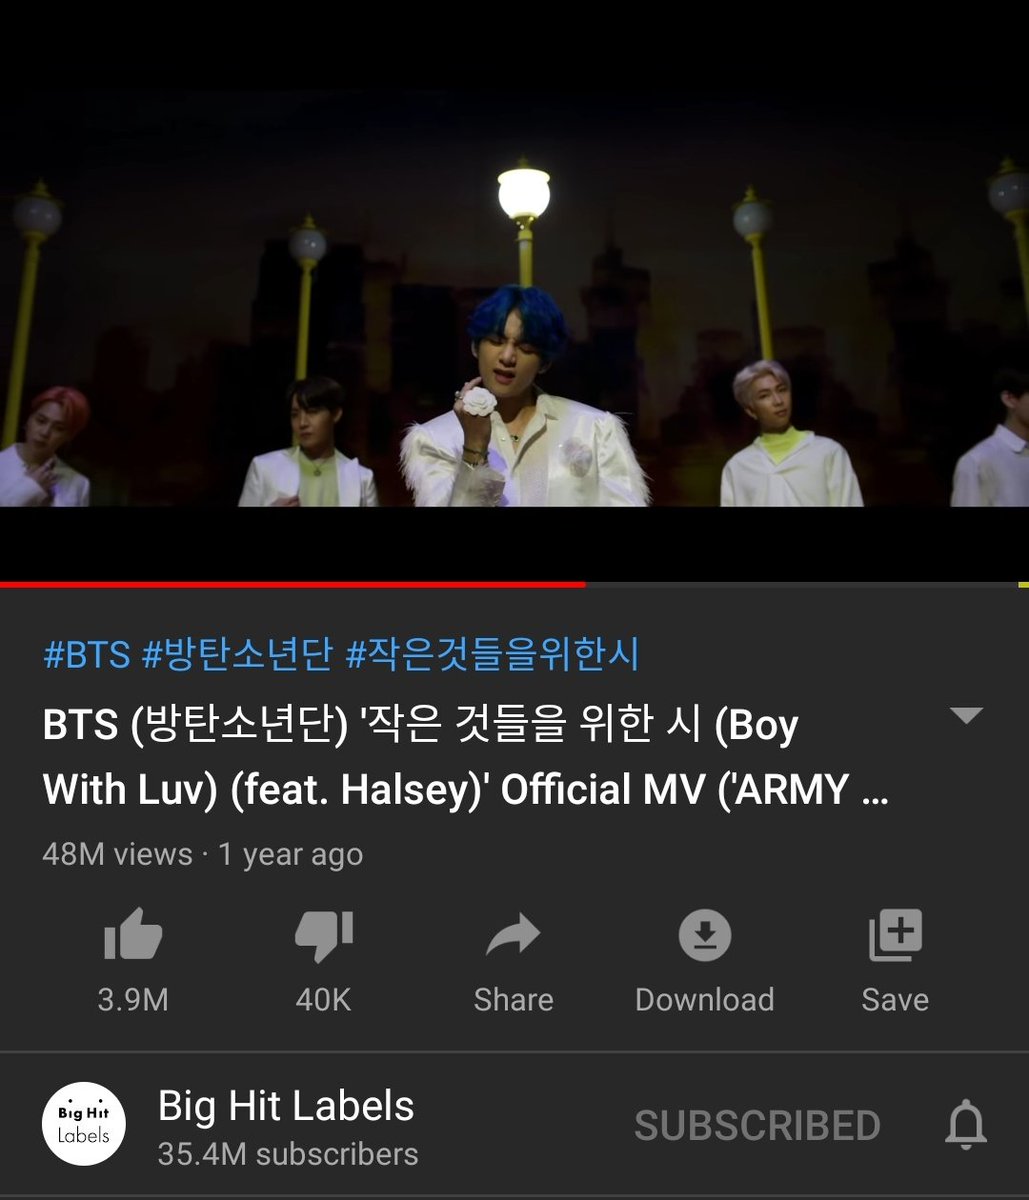 Boy with luv special MV for us army, being ignored buy us army